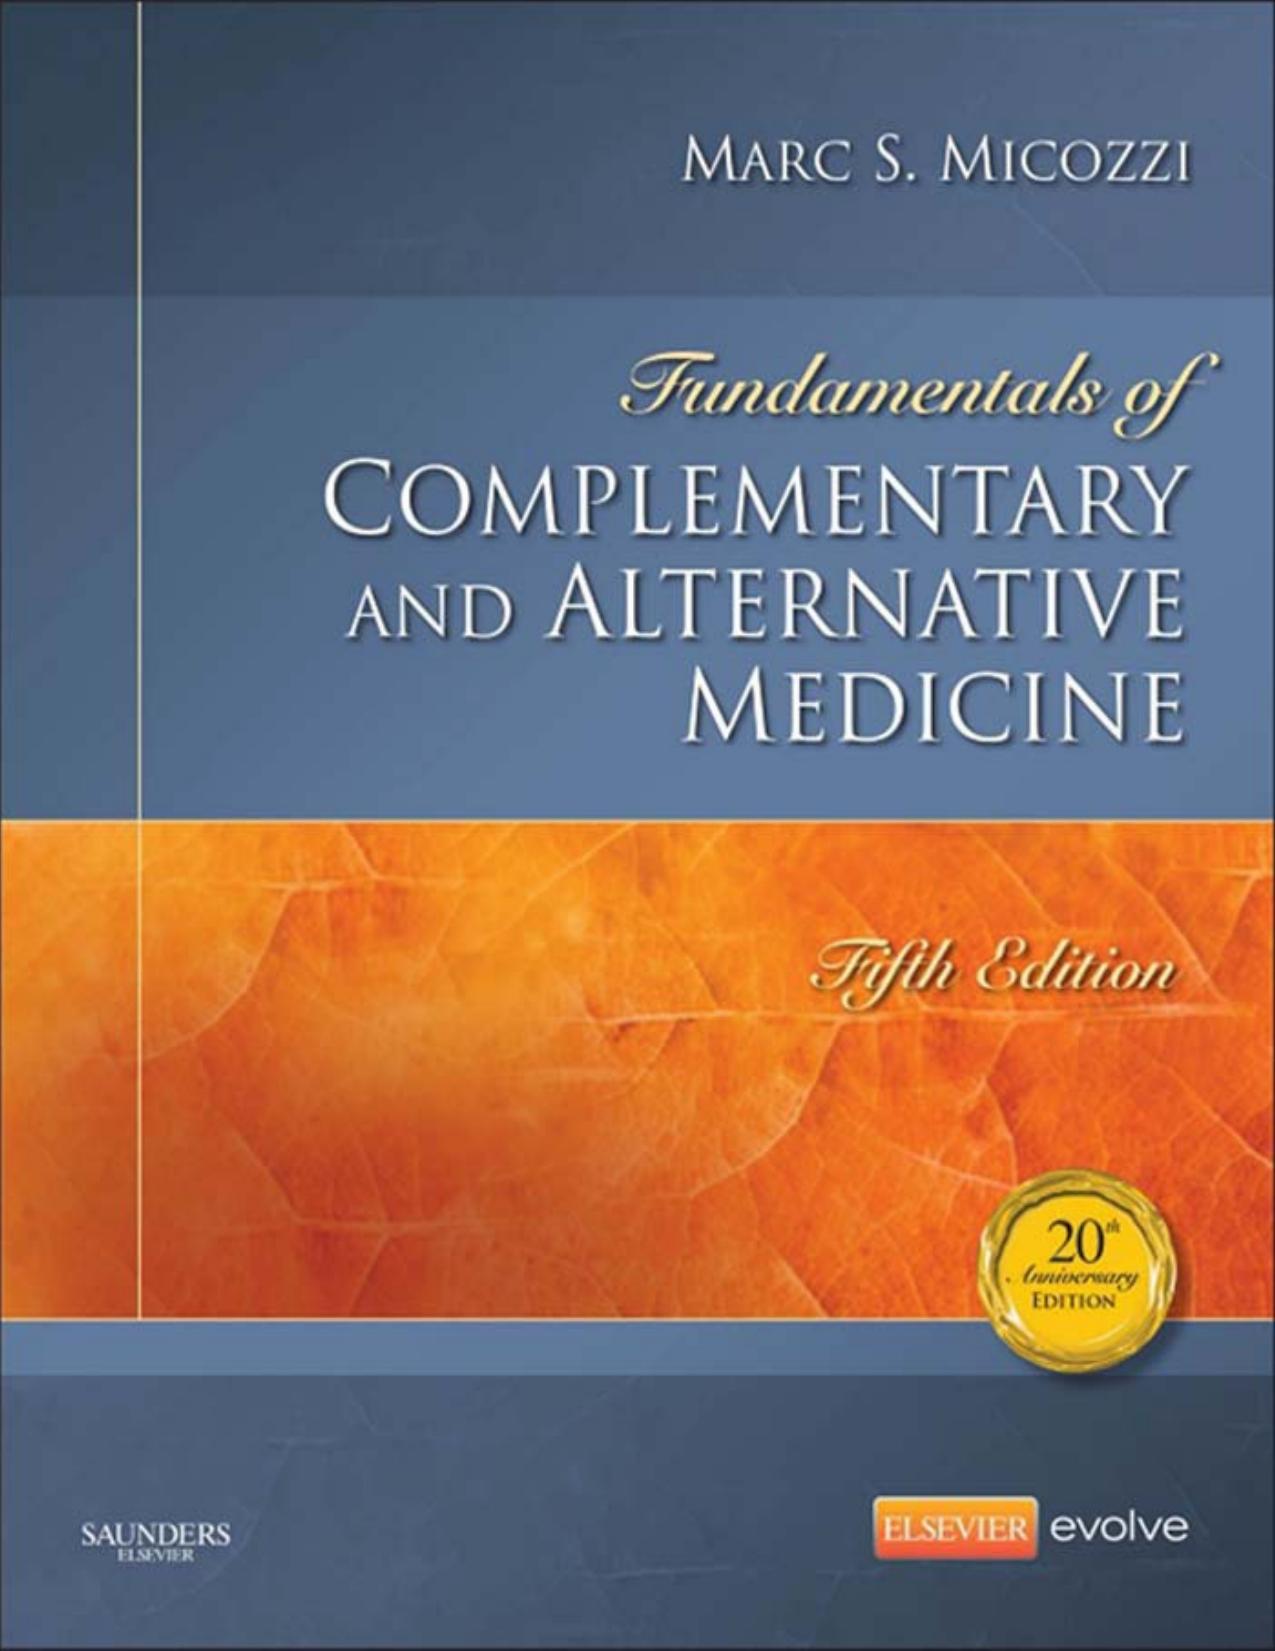 Fundamentals of Complementary and Alternative Medicine by Marc S. Micozzi